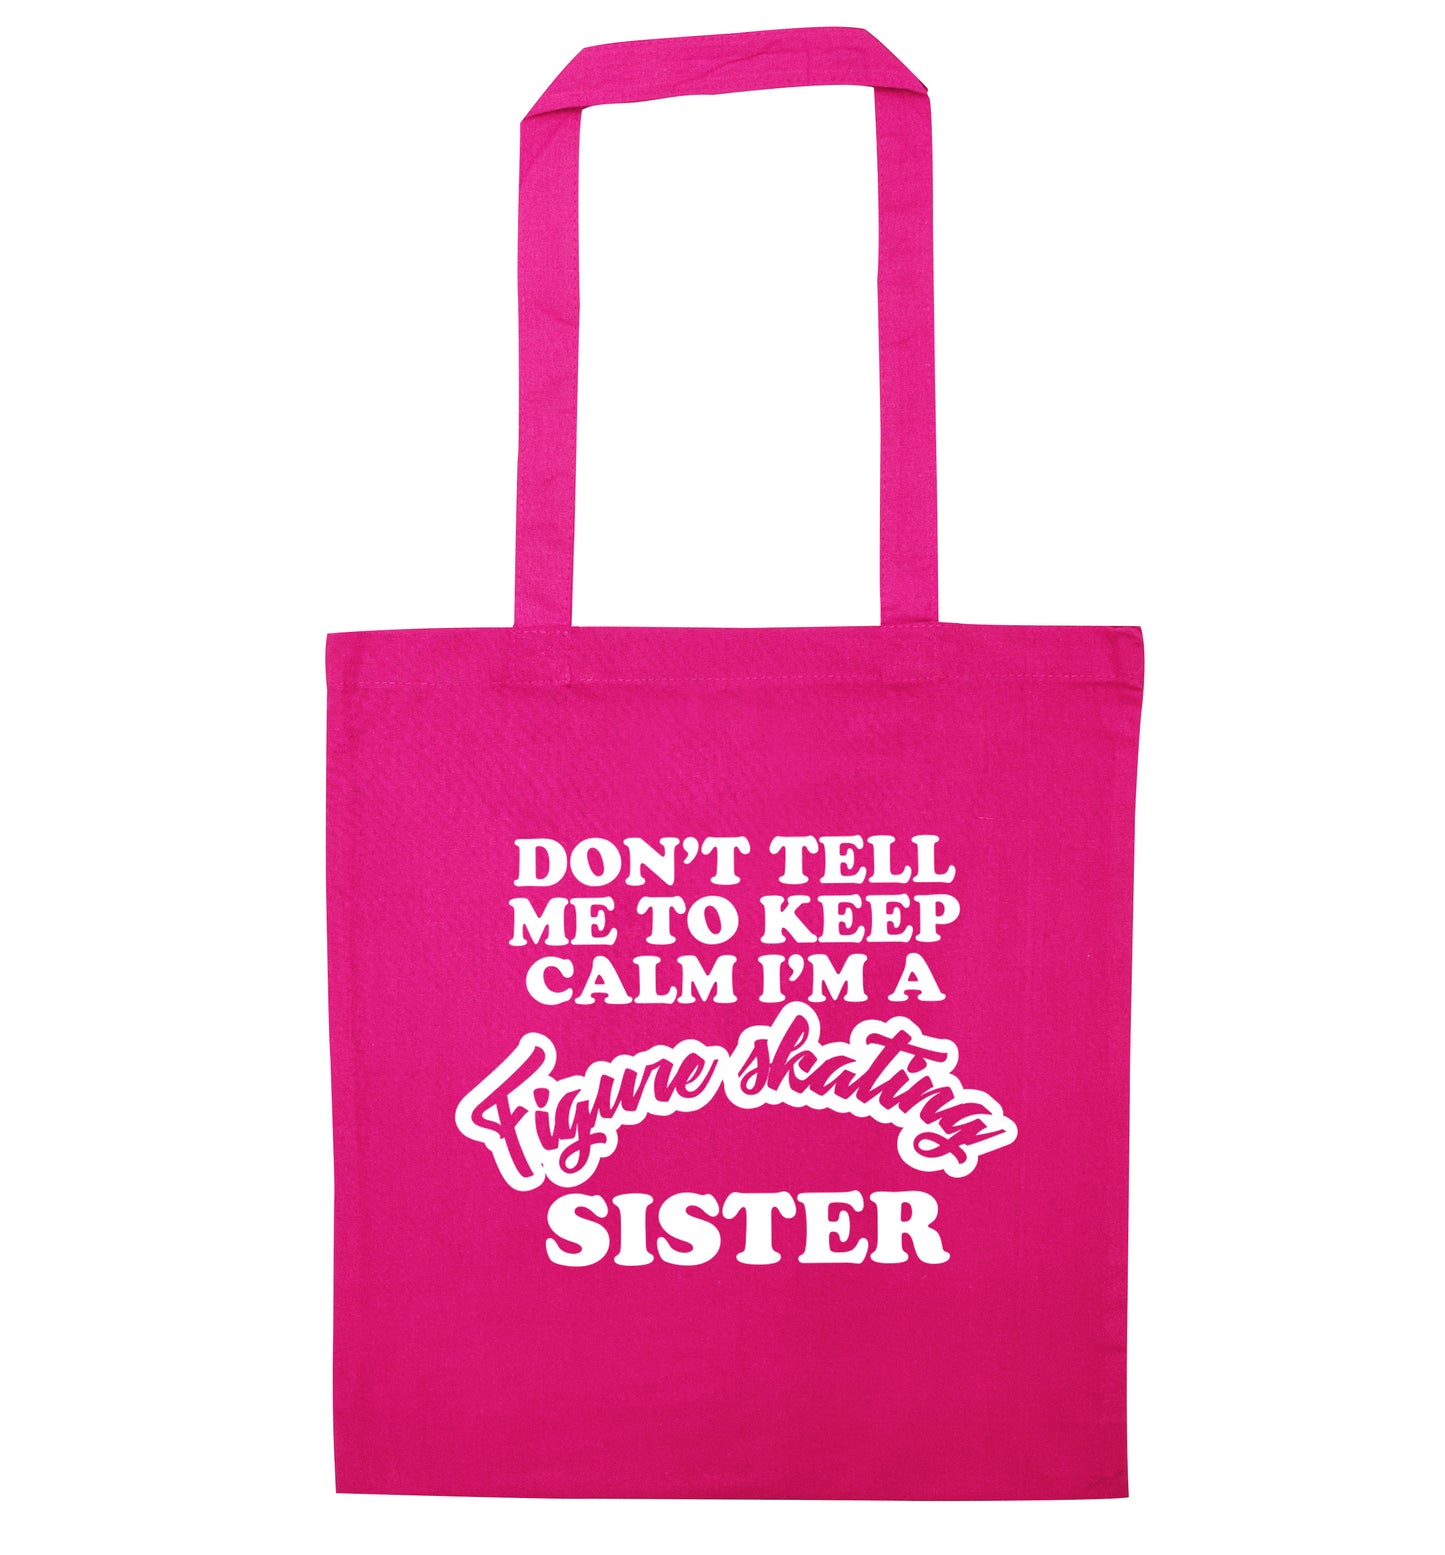 Don't tell me to keep calm I'm a figure skating sister pink tote bag